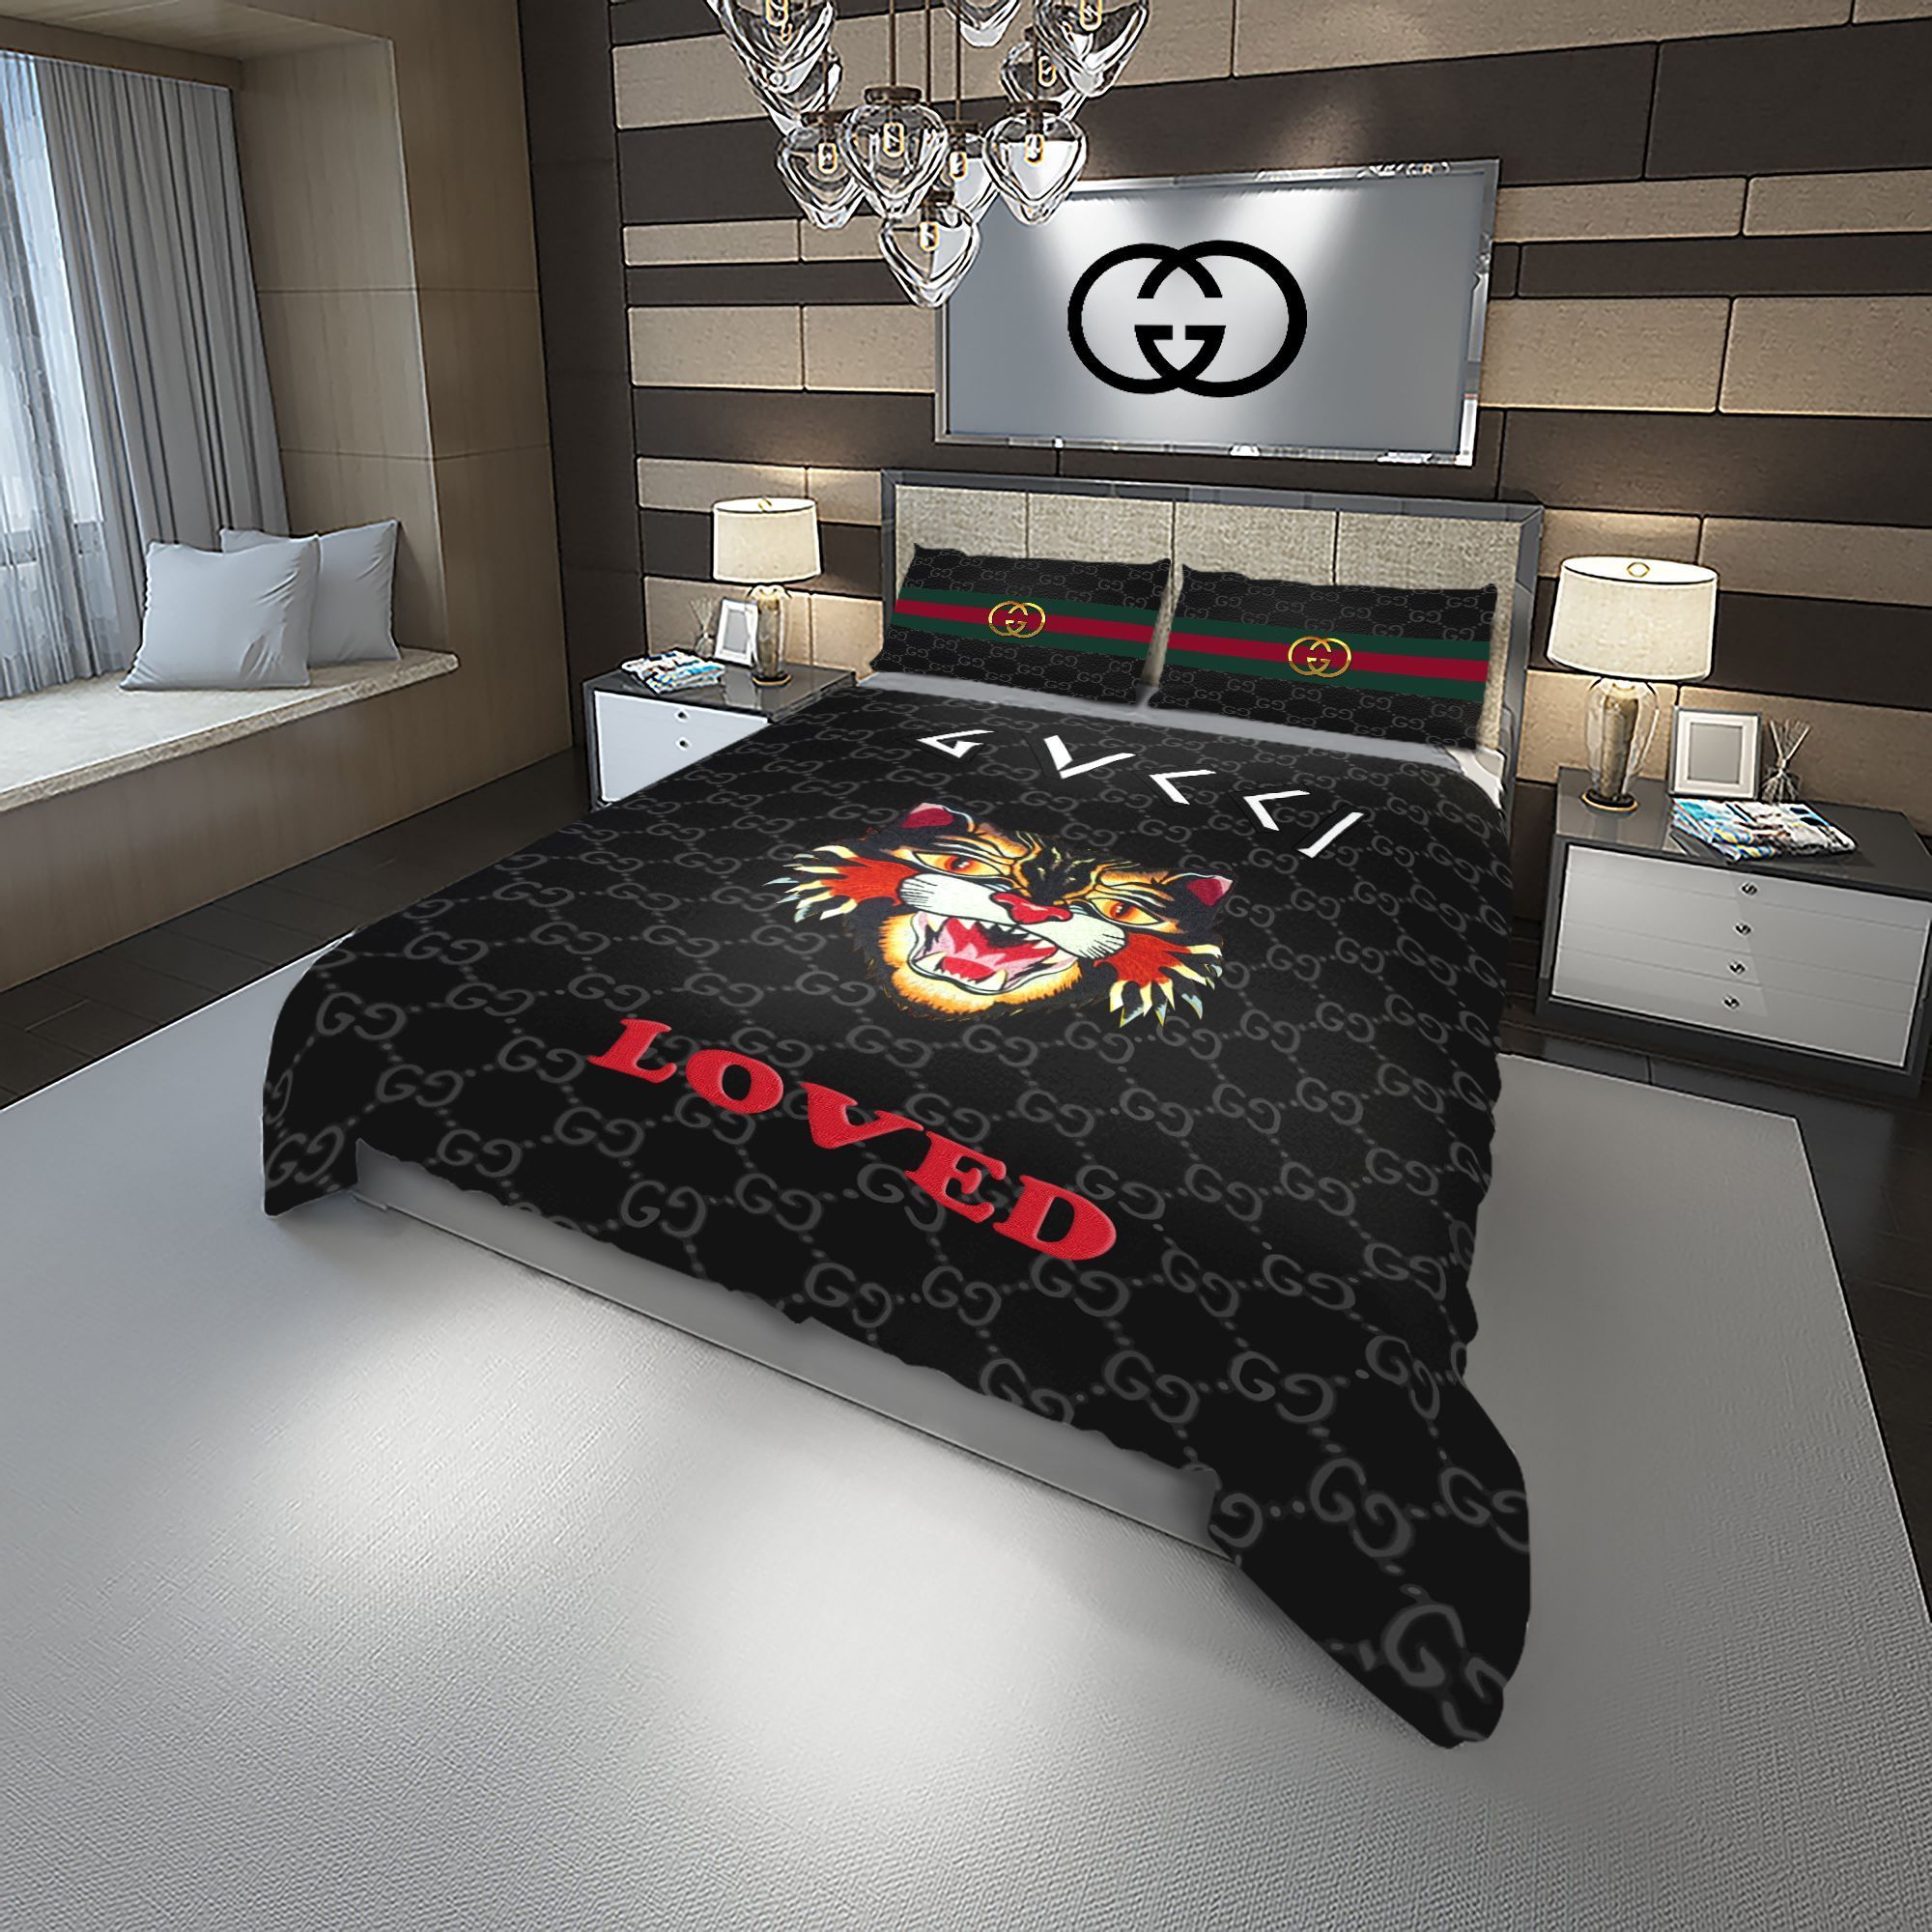 Let me show you about some luxury brand bedding set 2022 124